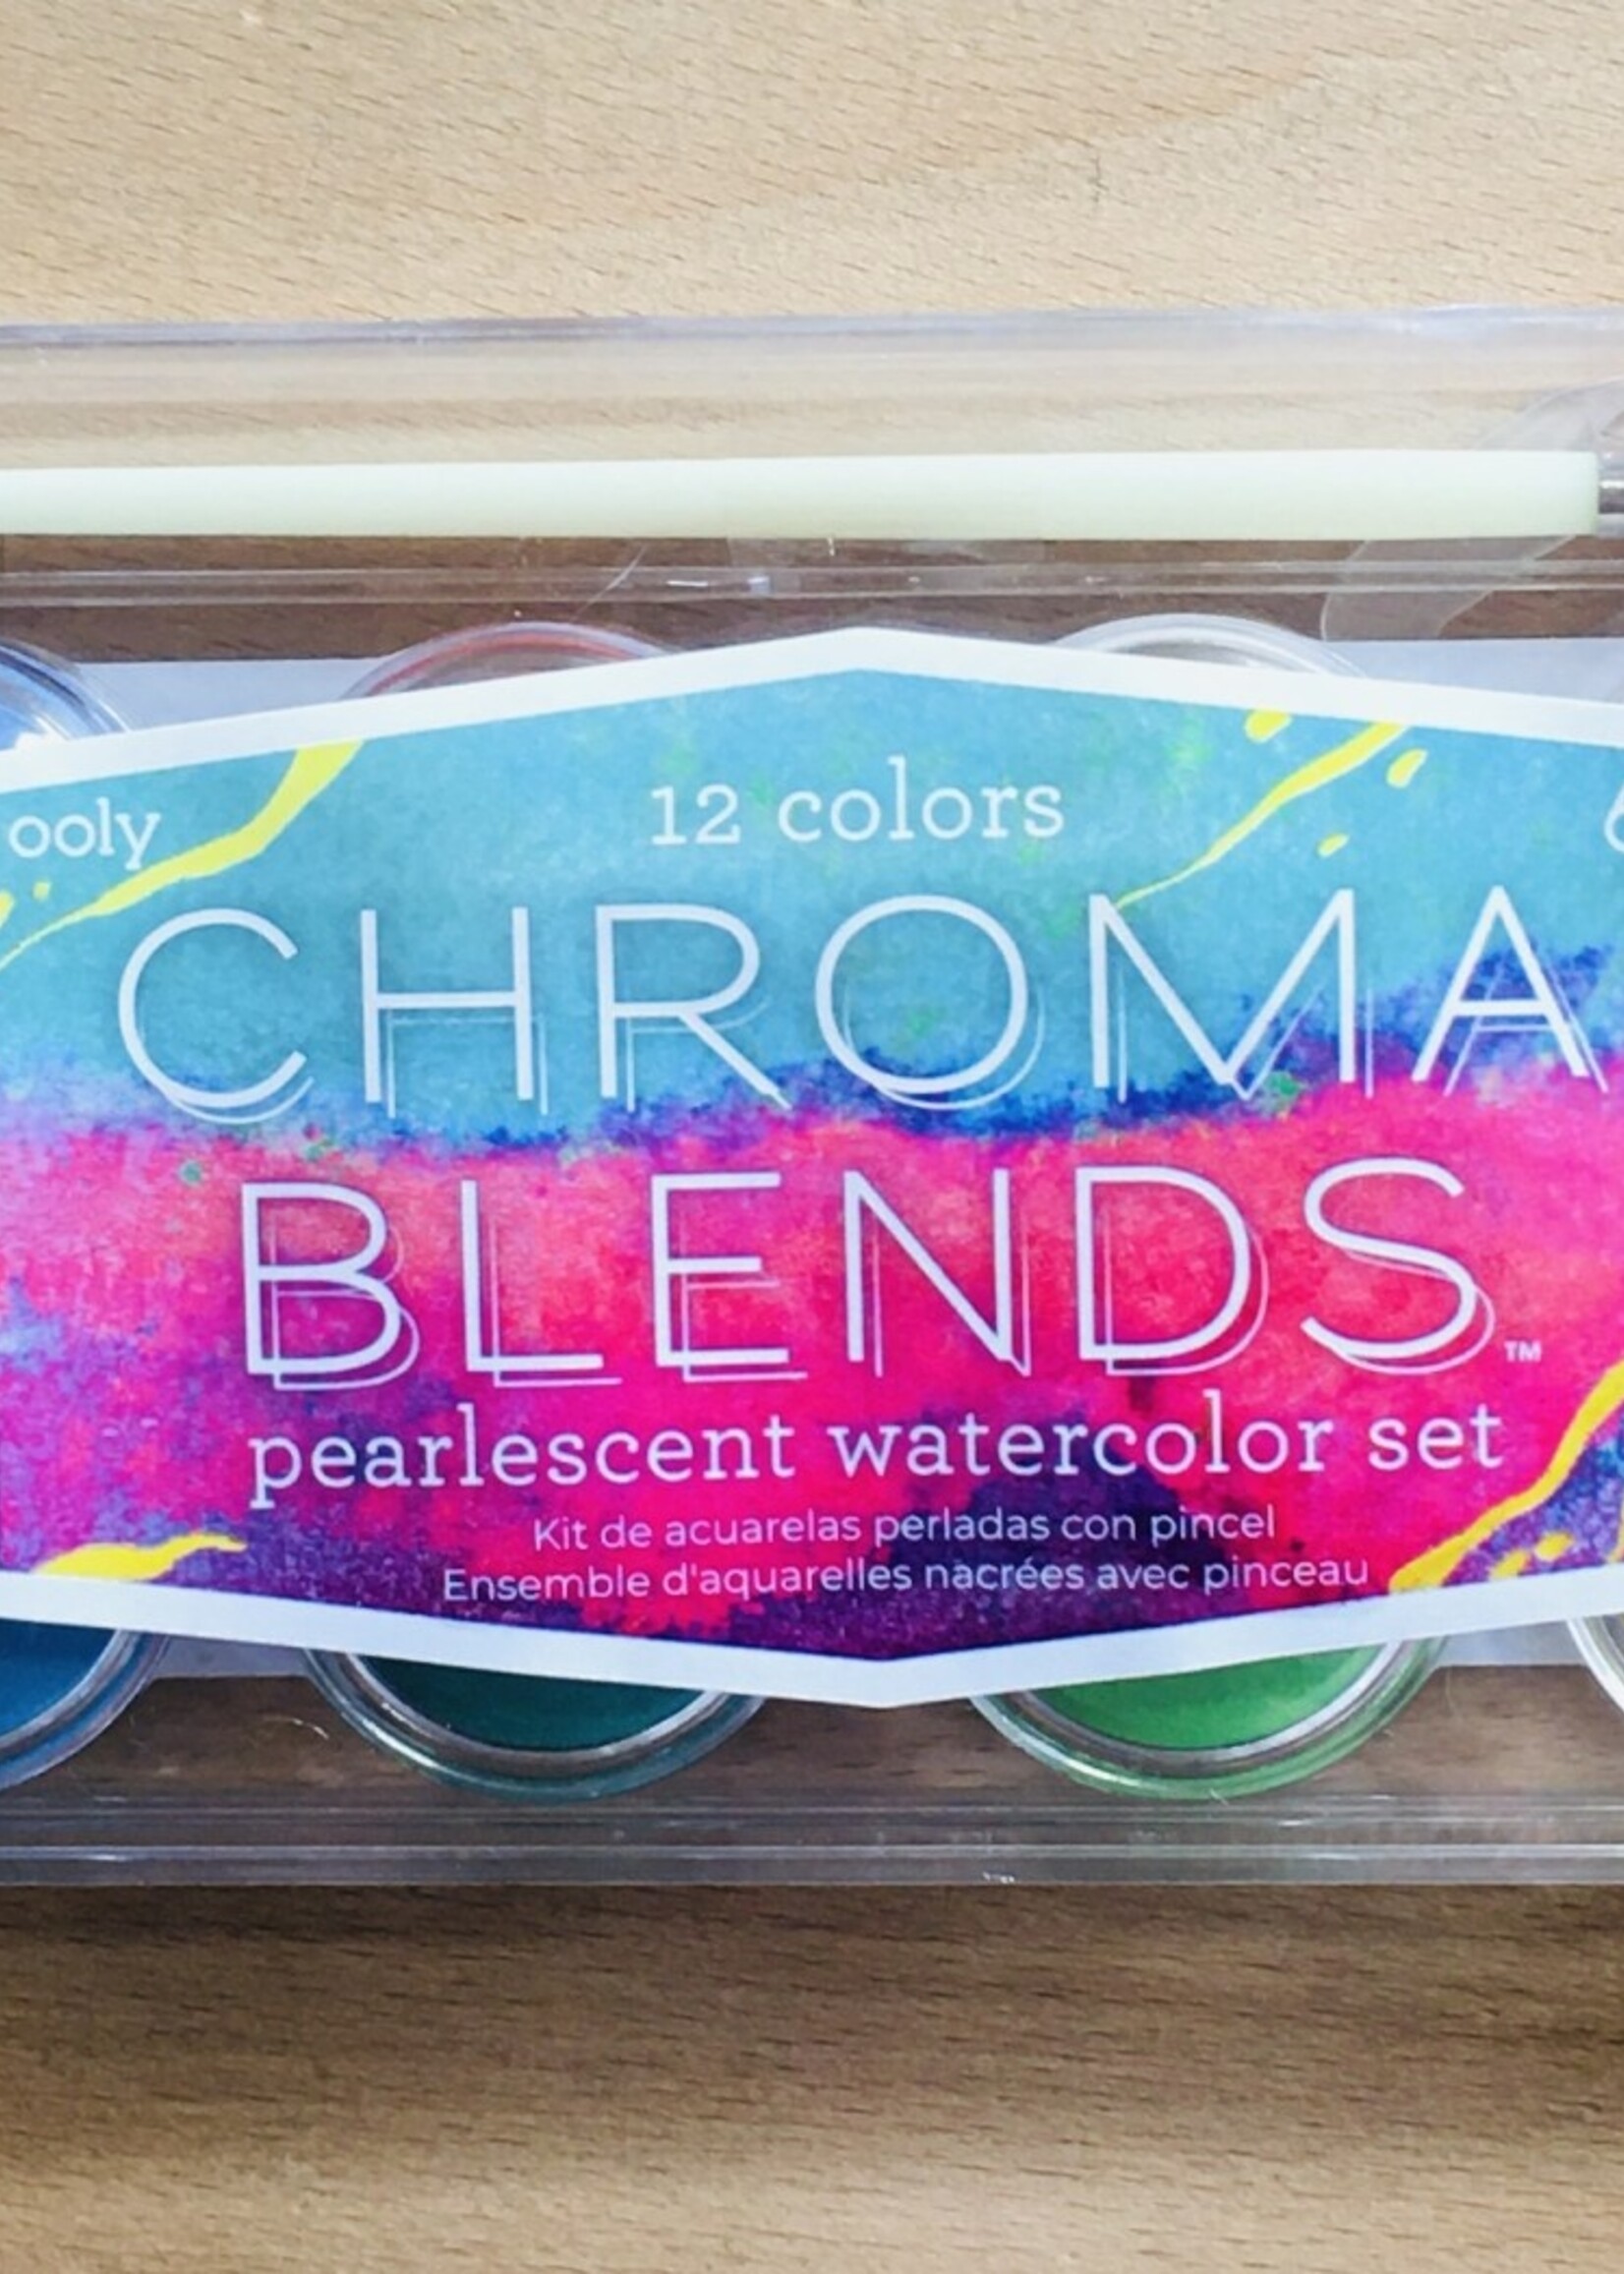 Chroma Blends- pearlescent watercolor